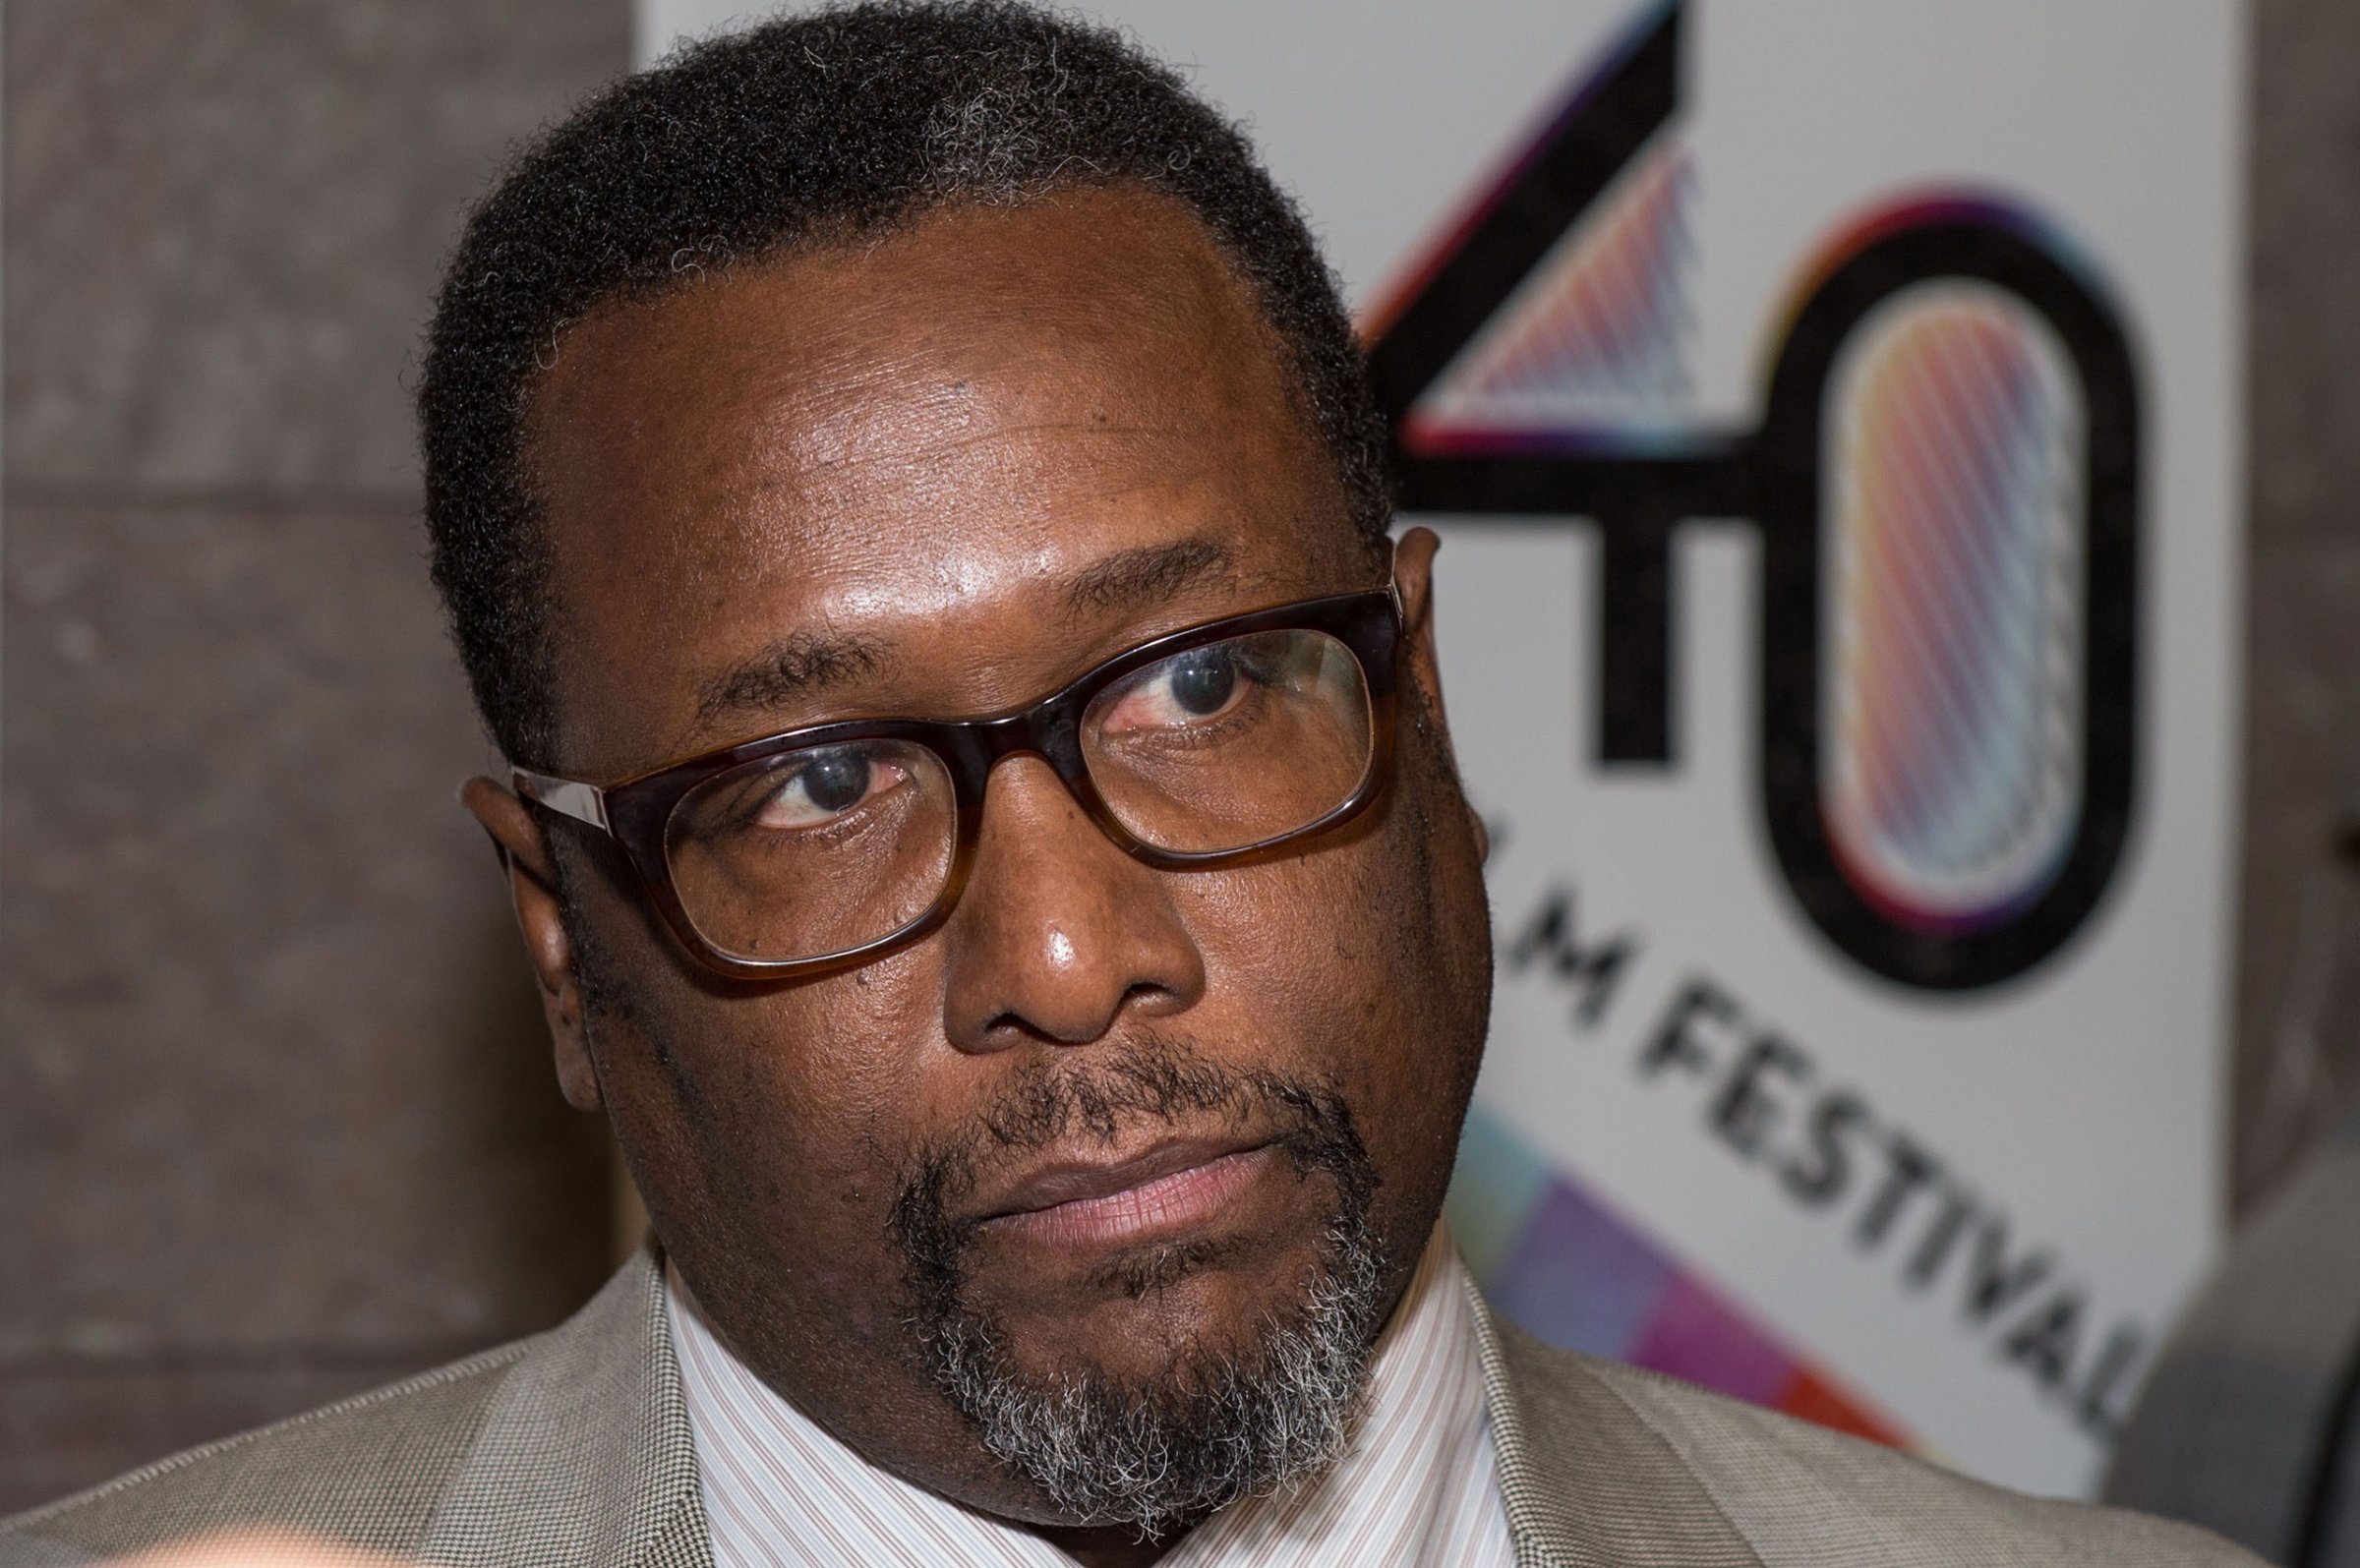 Wendell Pierce attends a screening of HBO's 'Confirmation' during the 40th Annual Atlanta Film Festival in Atlanta, Georgia on April 3, 2016.